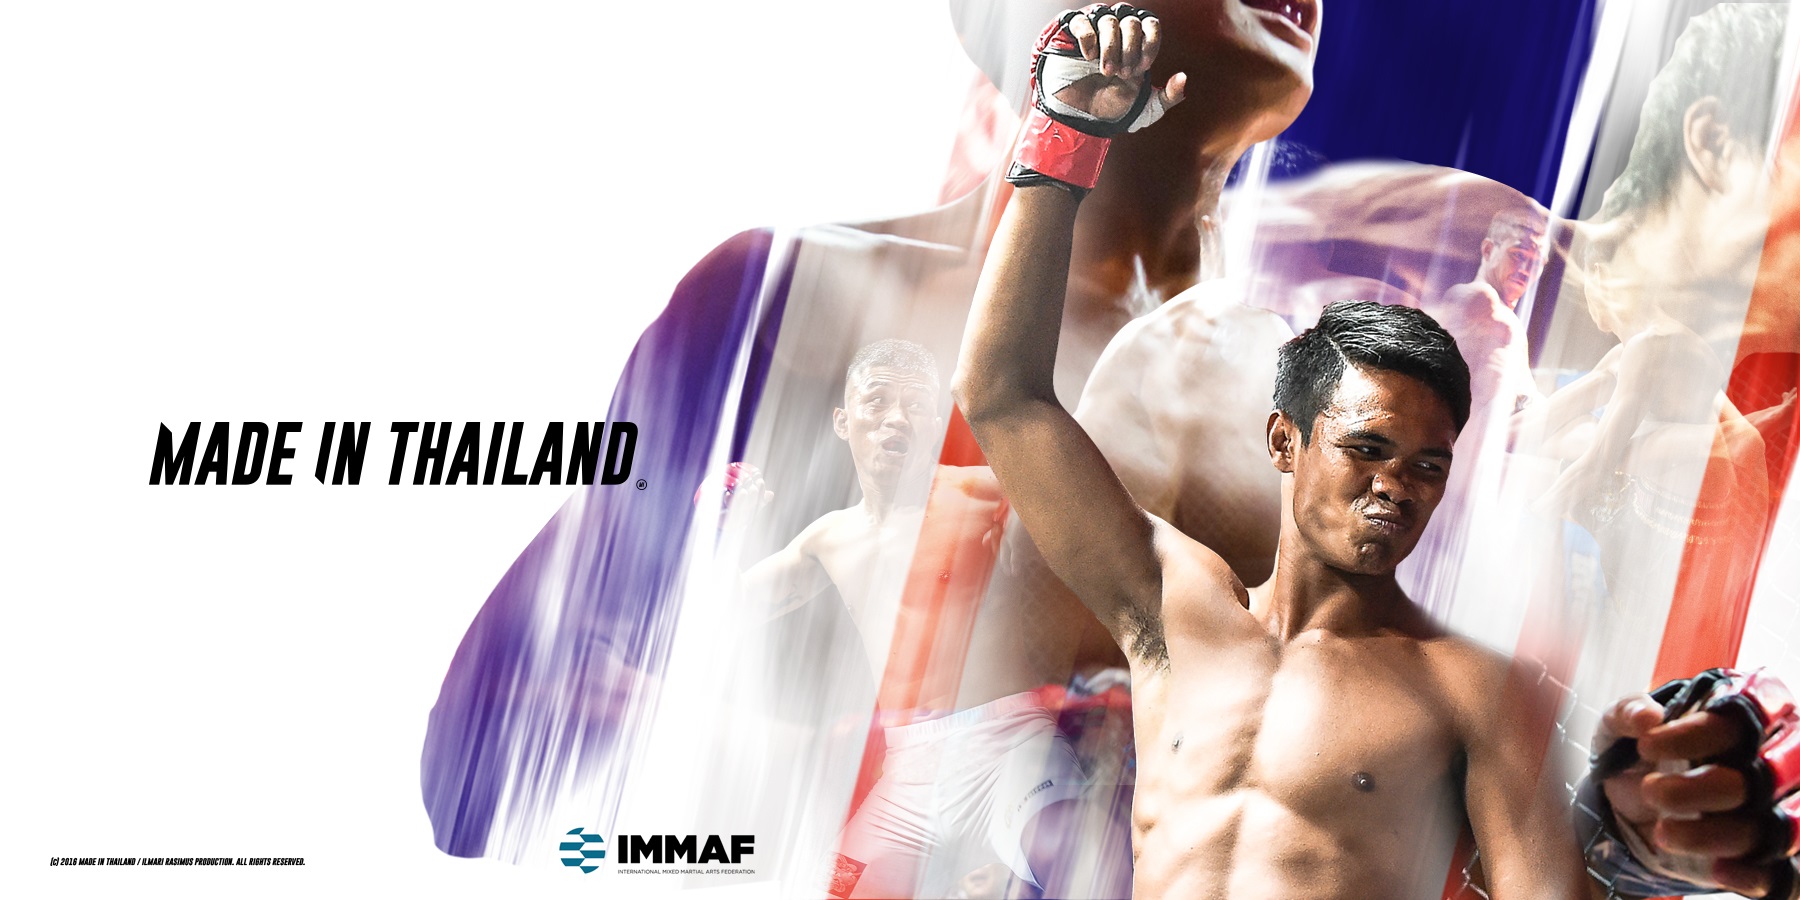 Thai Mixed Martial Arts Federation formed under IMMAF Banner